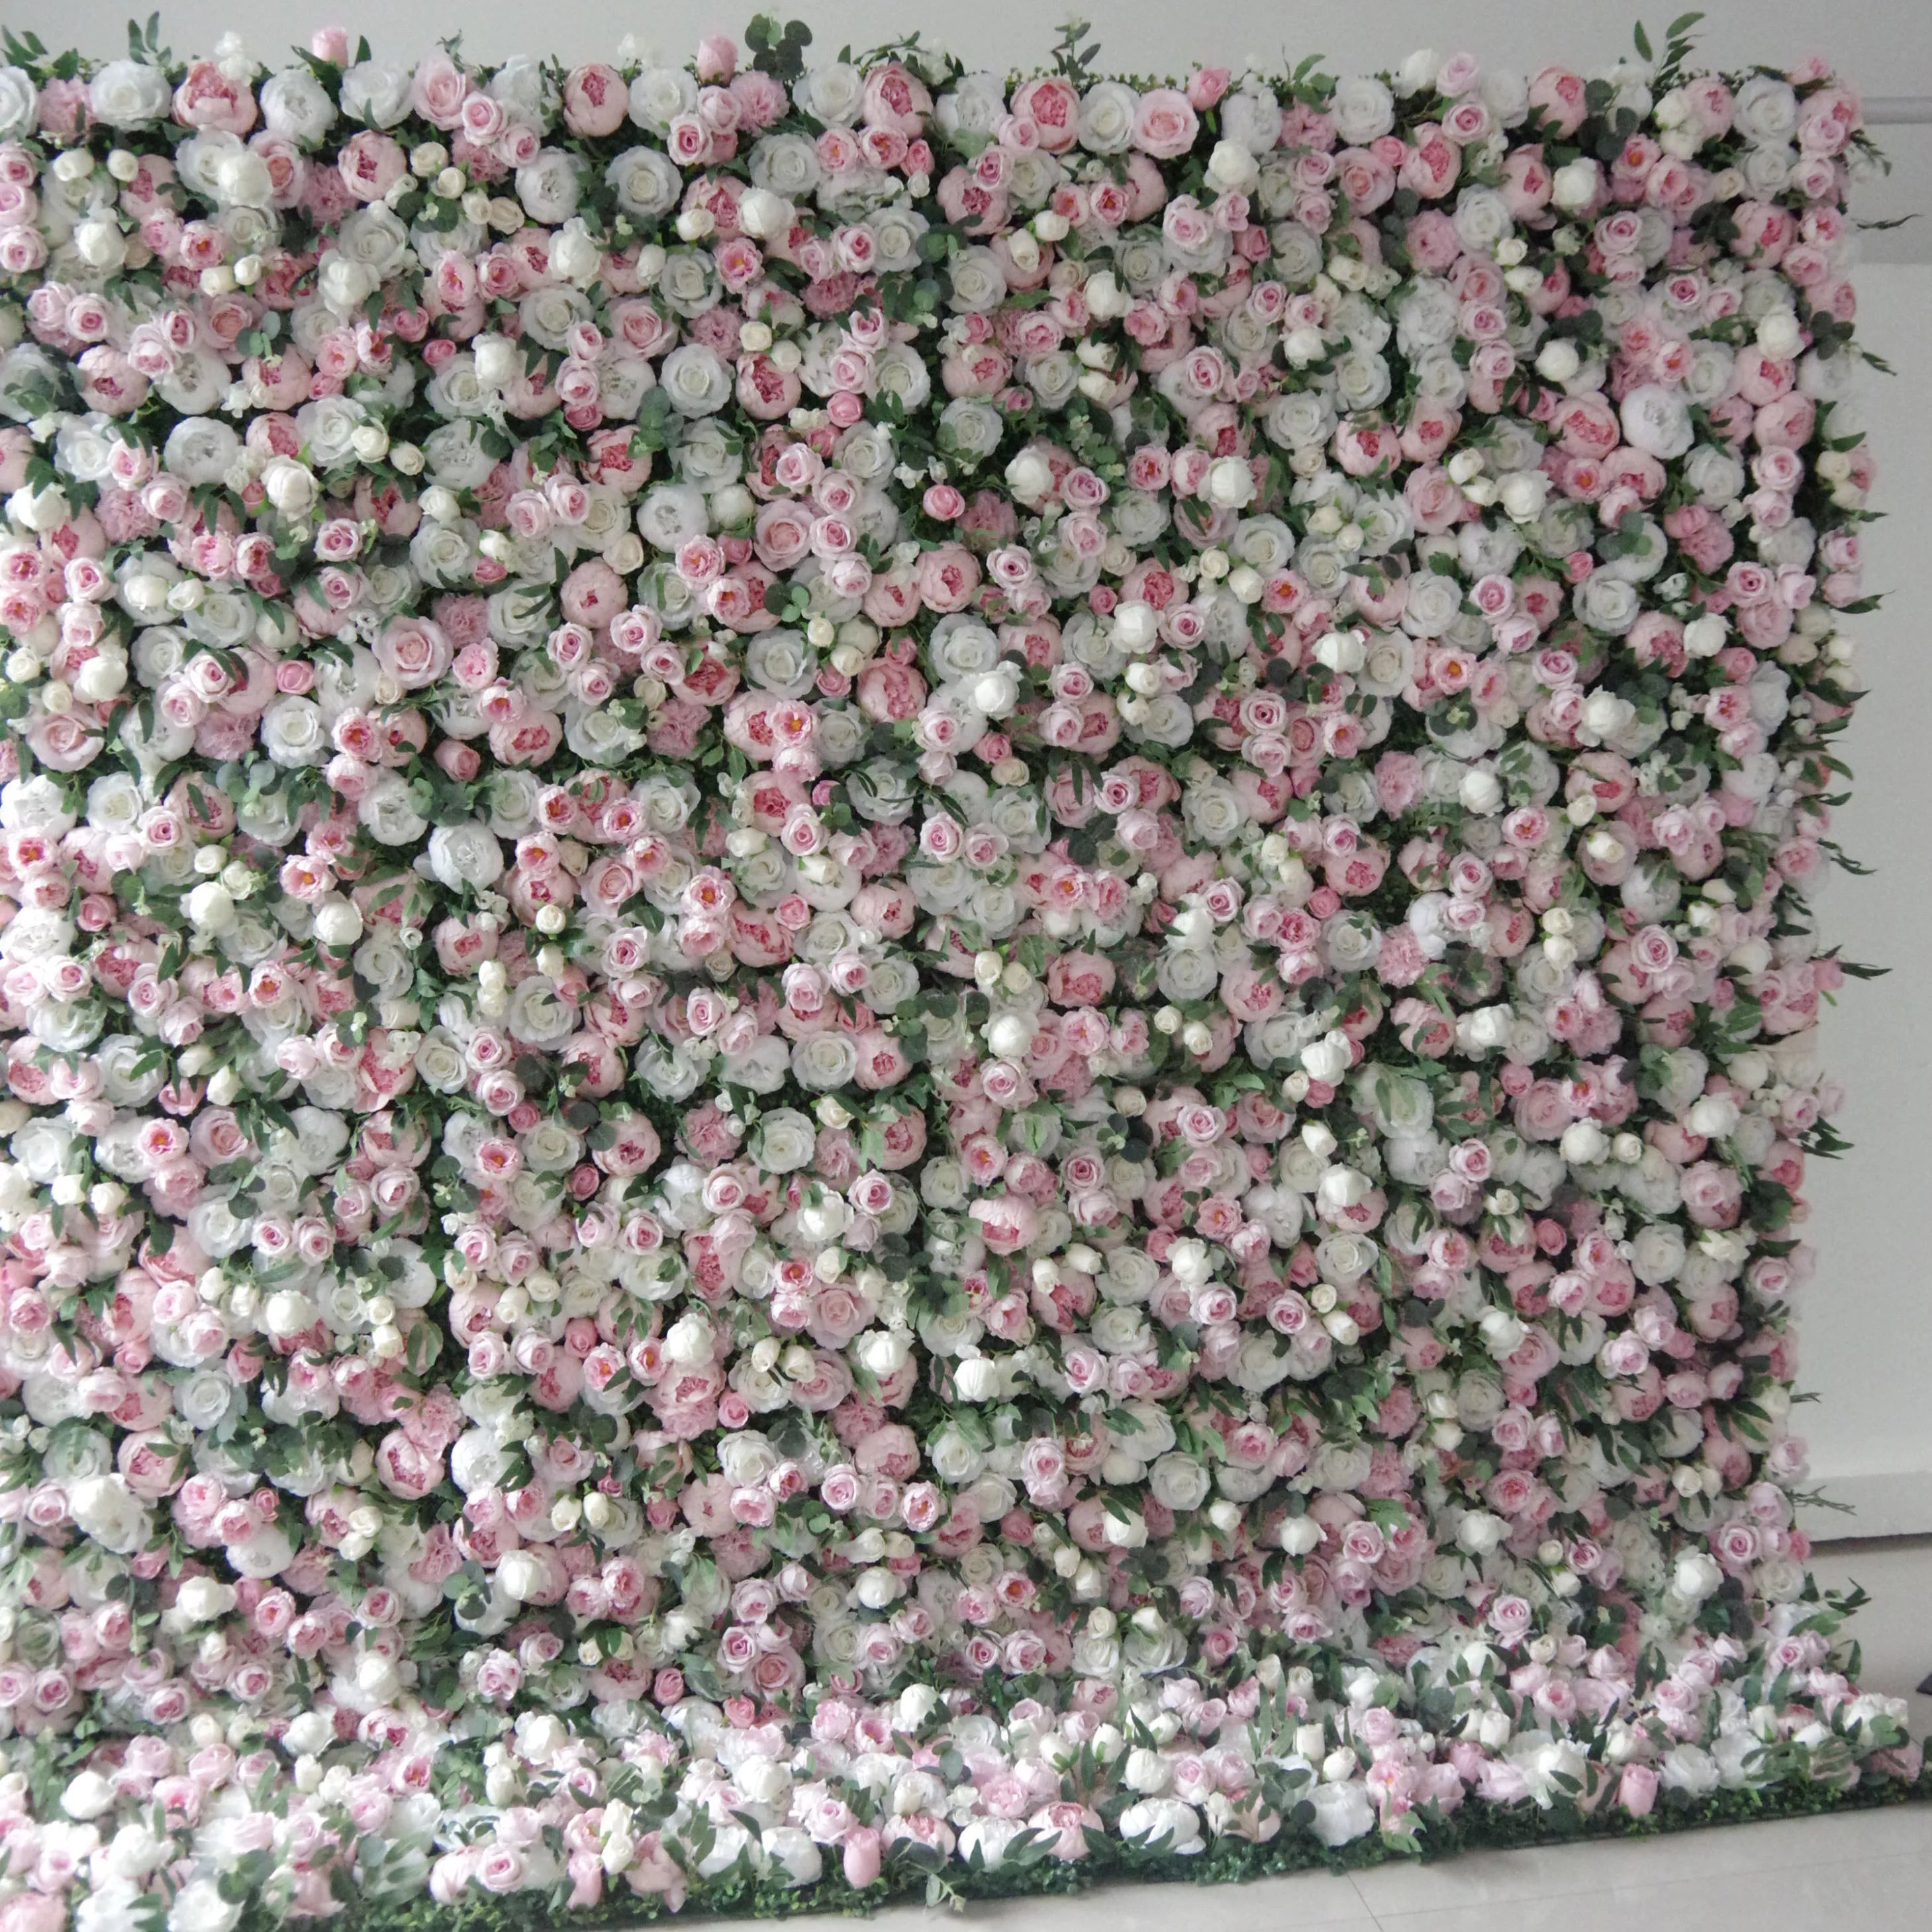 Valar Flowers Roll Up Fabric Artificial Mixed Pink and White Floral Wall for Wedding Backdrop, Floral Party Decor, Event Photography0